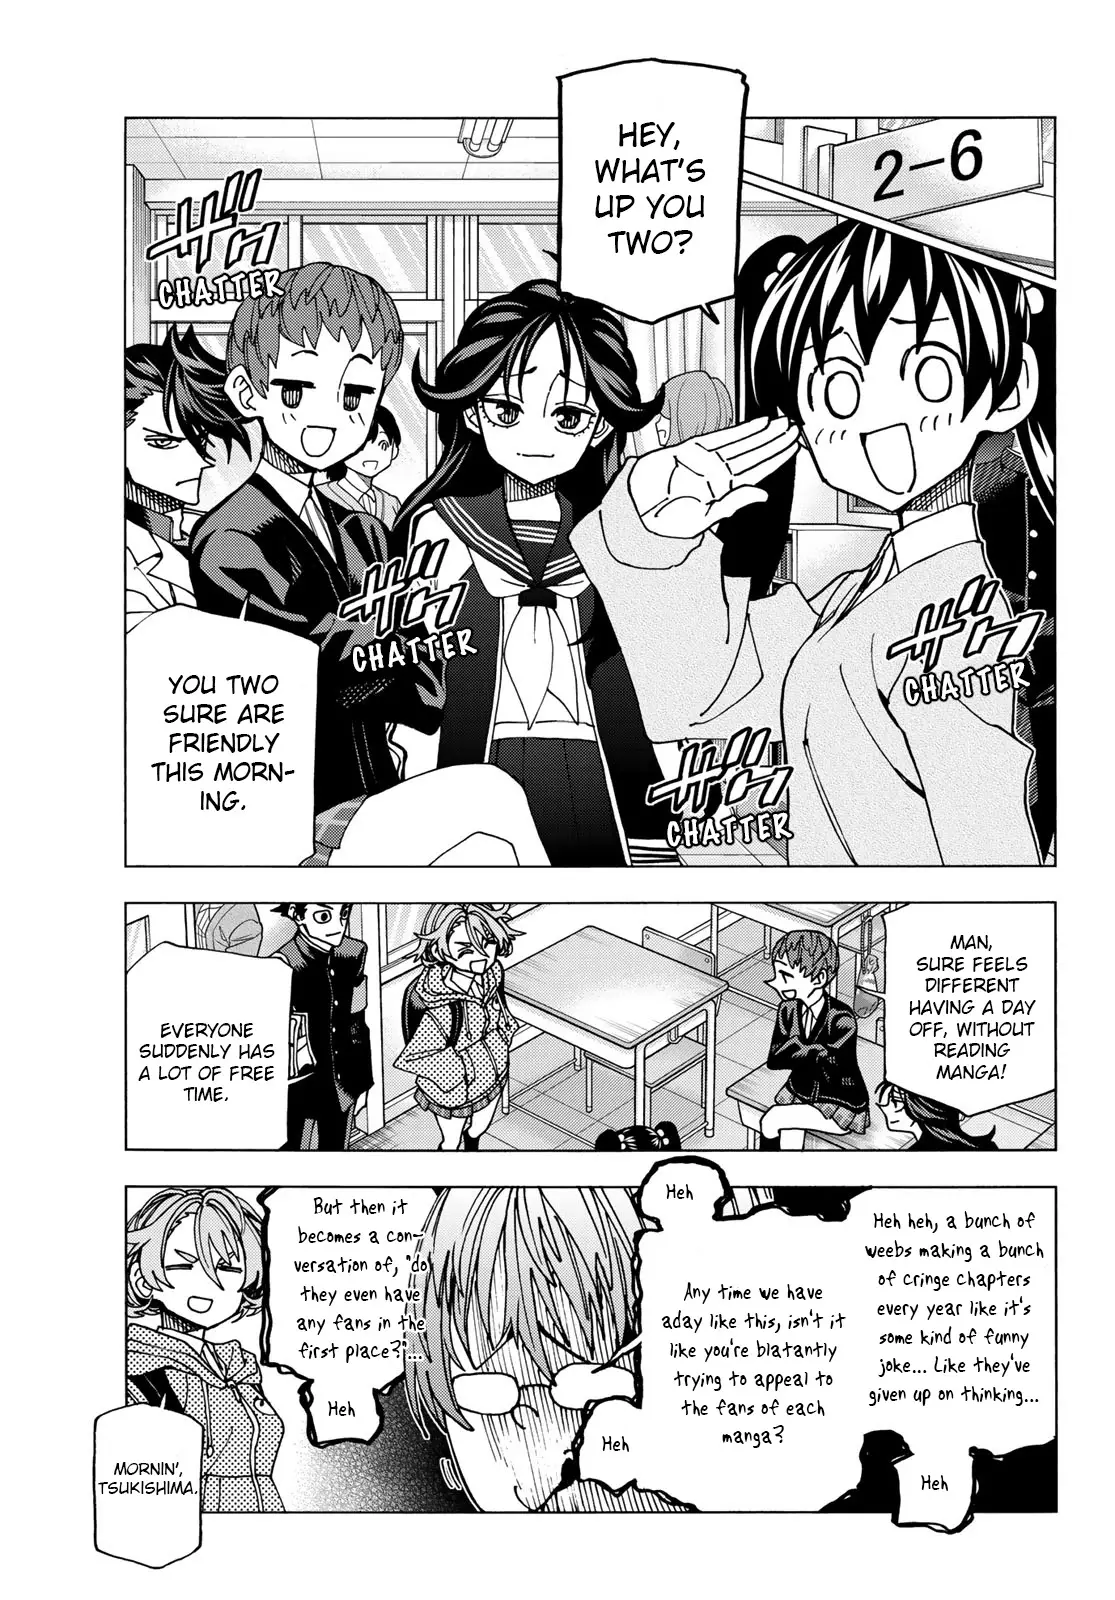 The Story Between A Dumb Prefect And A High School Girl With An Inappropriate Skirt Length - 68 page 6-ddc52031